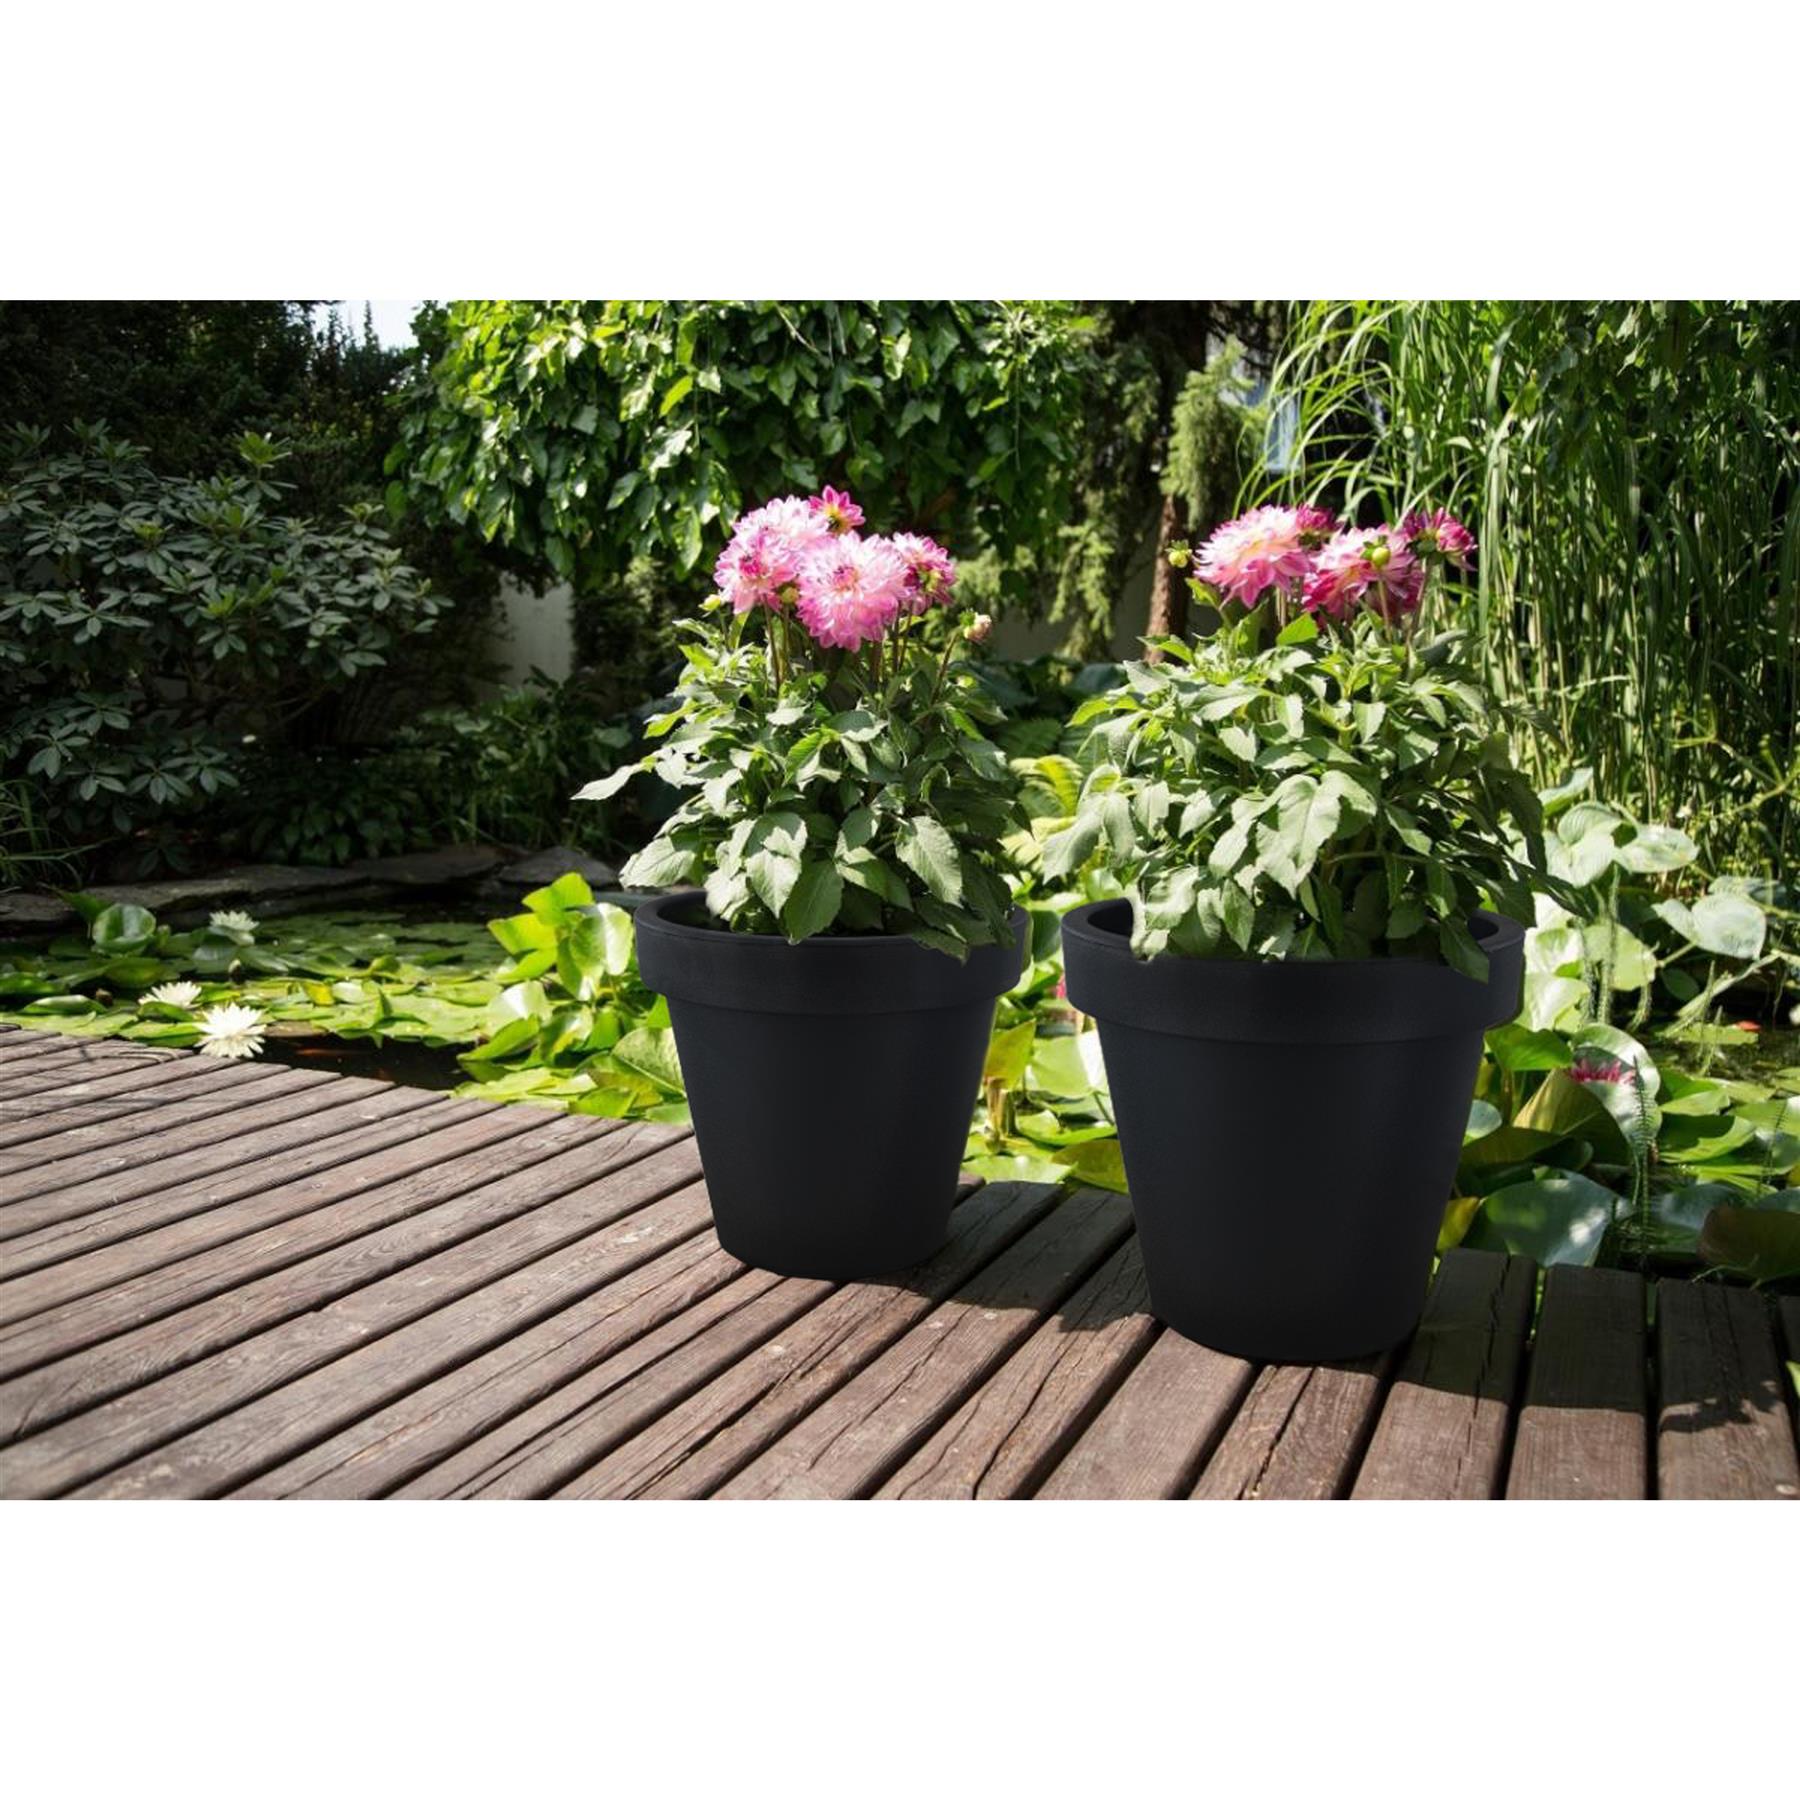 Anthracite Large Flower Pot Planter 35 x 31 cm by Geezy - The Magic Toy Shop